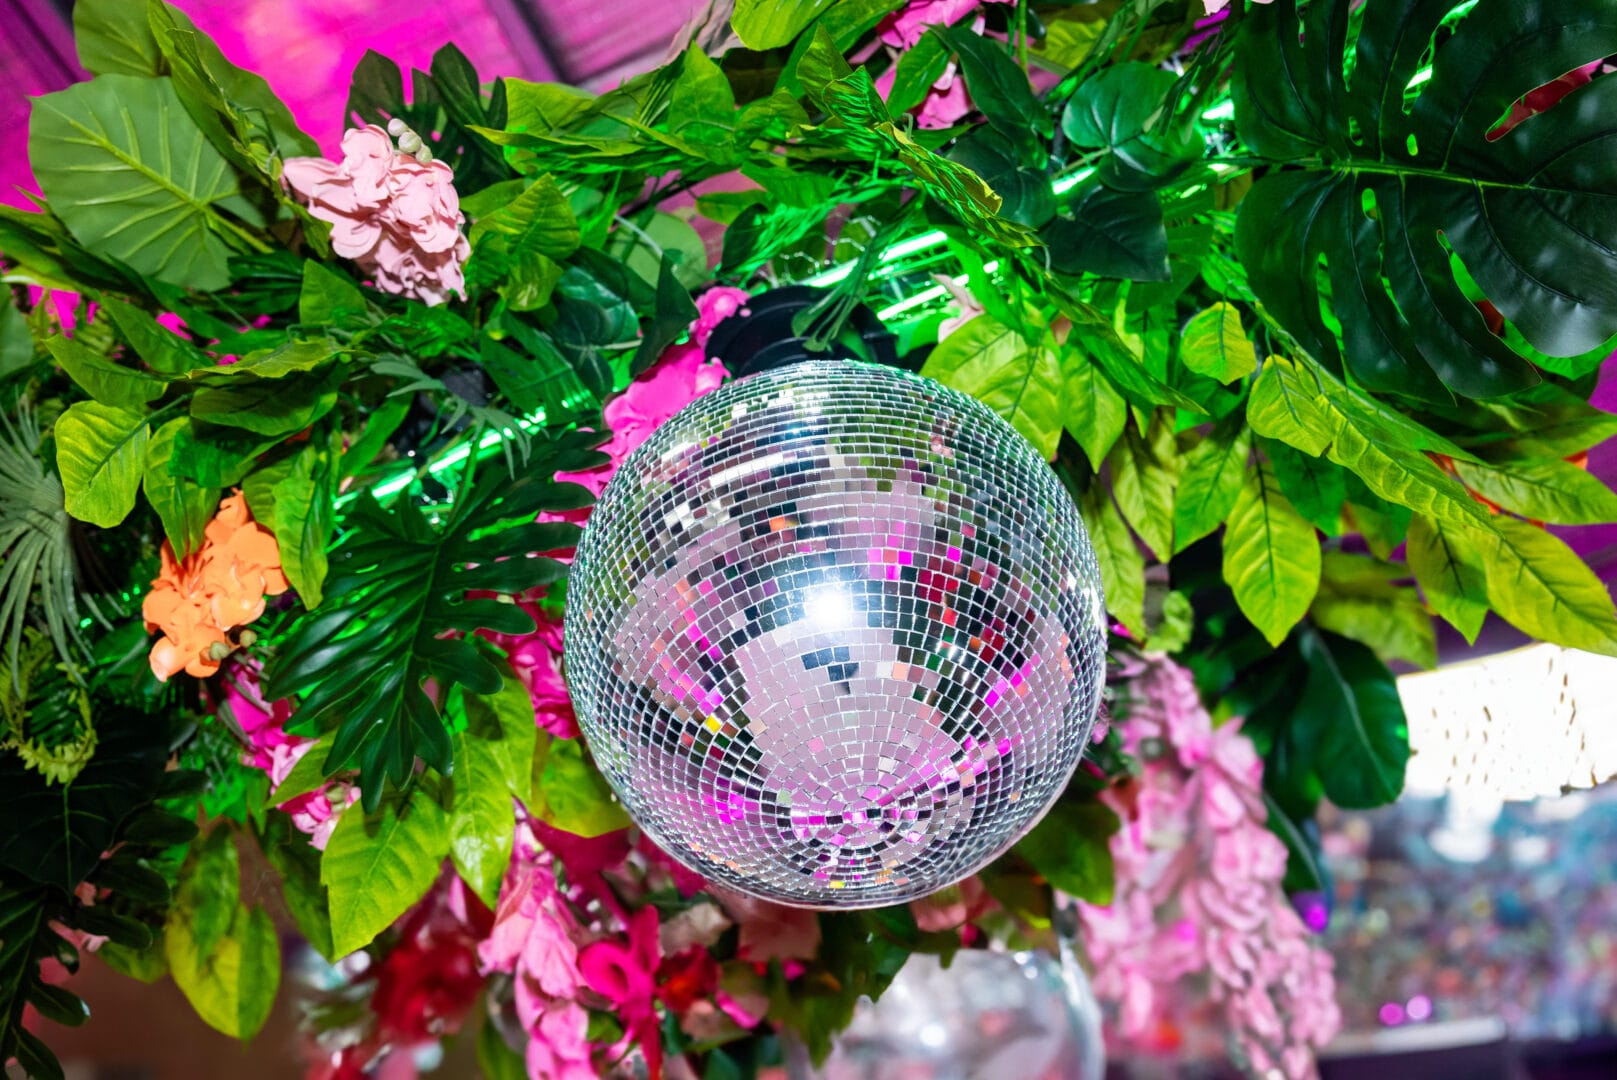 Silver mirror ball surrounded by tropical greenery and flowers